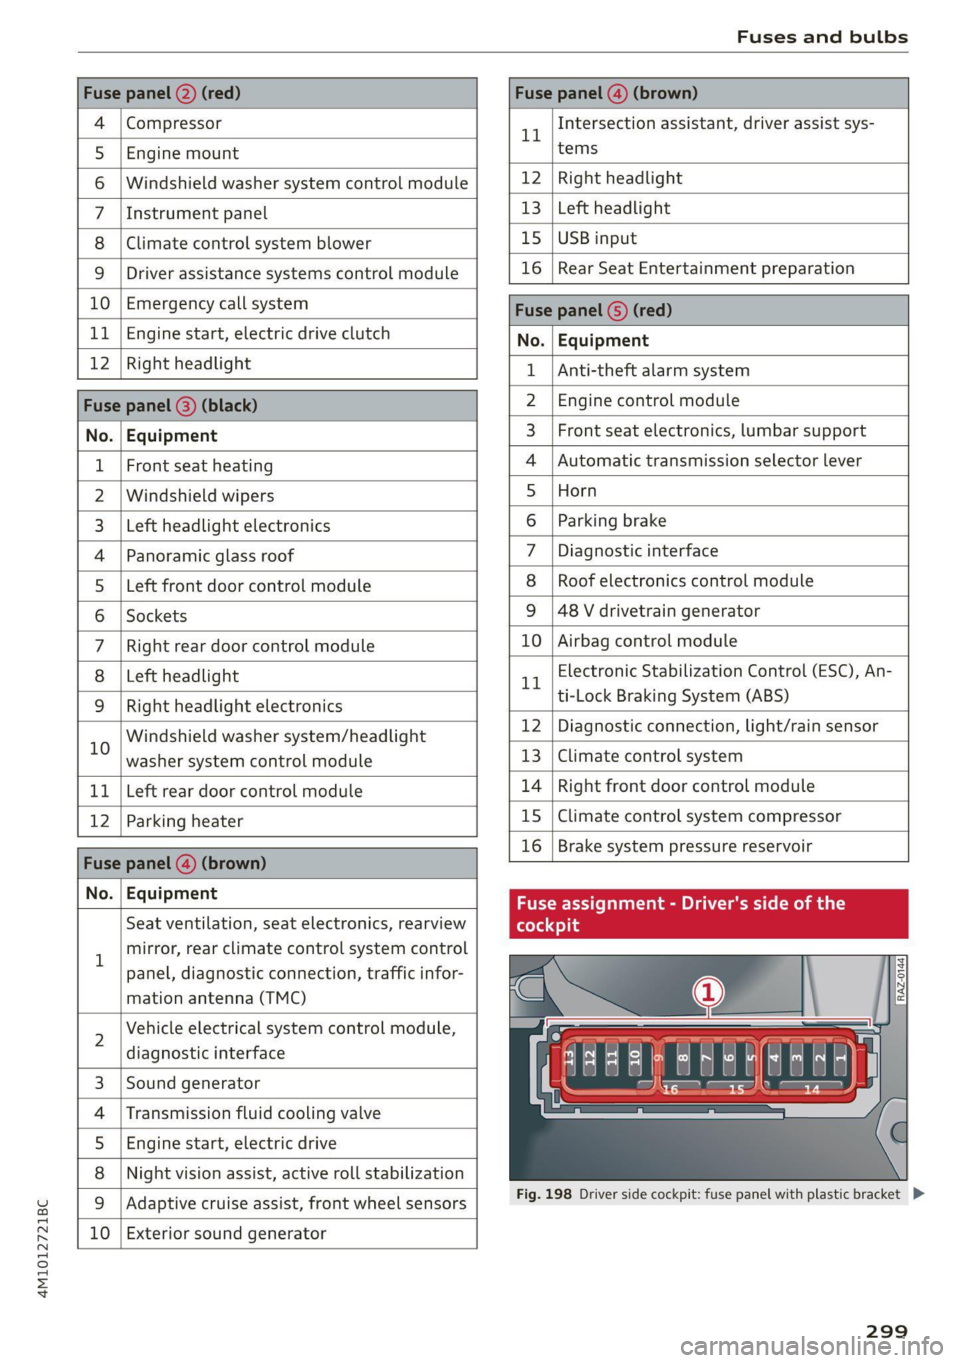 AUDI Q7 2021  Owner´s Manual 4M1012721BC 
Fuses and bulbs 
  
     
  
    
      
  
    
      
  
  
    
      
    
    
    
    
  
  
    
    
    
    
  
  
  
    
    
  
    
  
        
  
  
Fuse panel @) (red) Fu